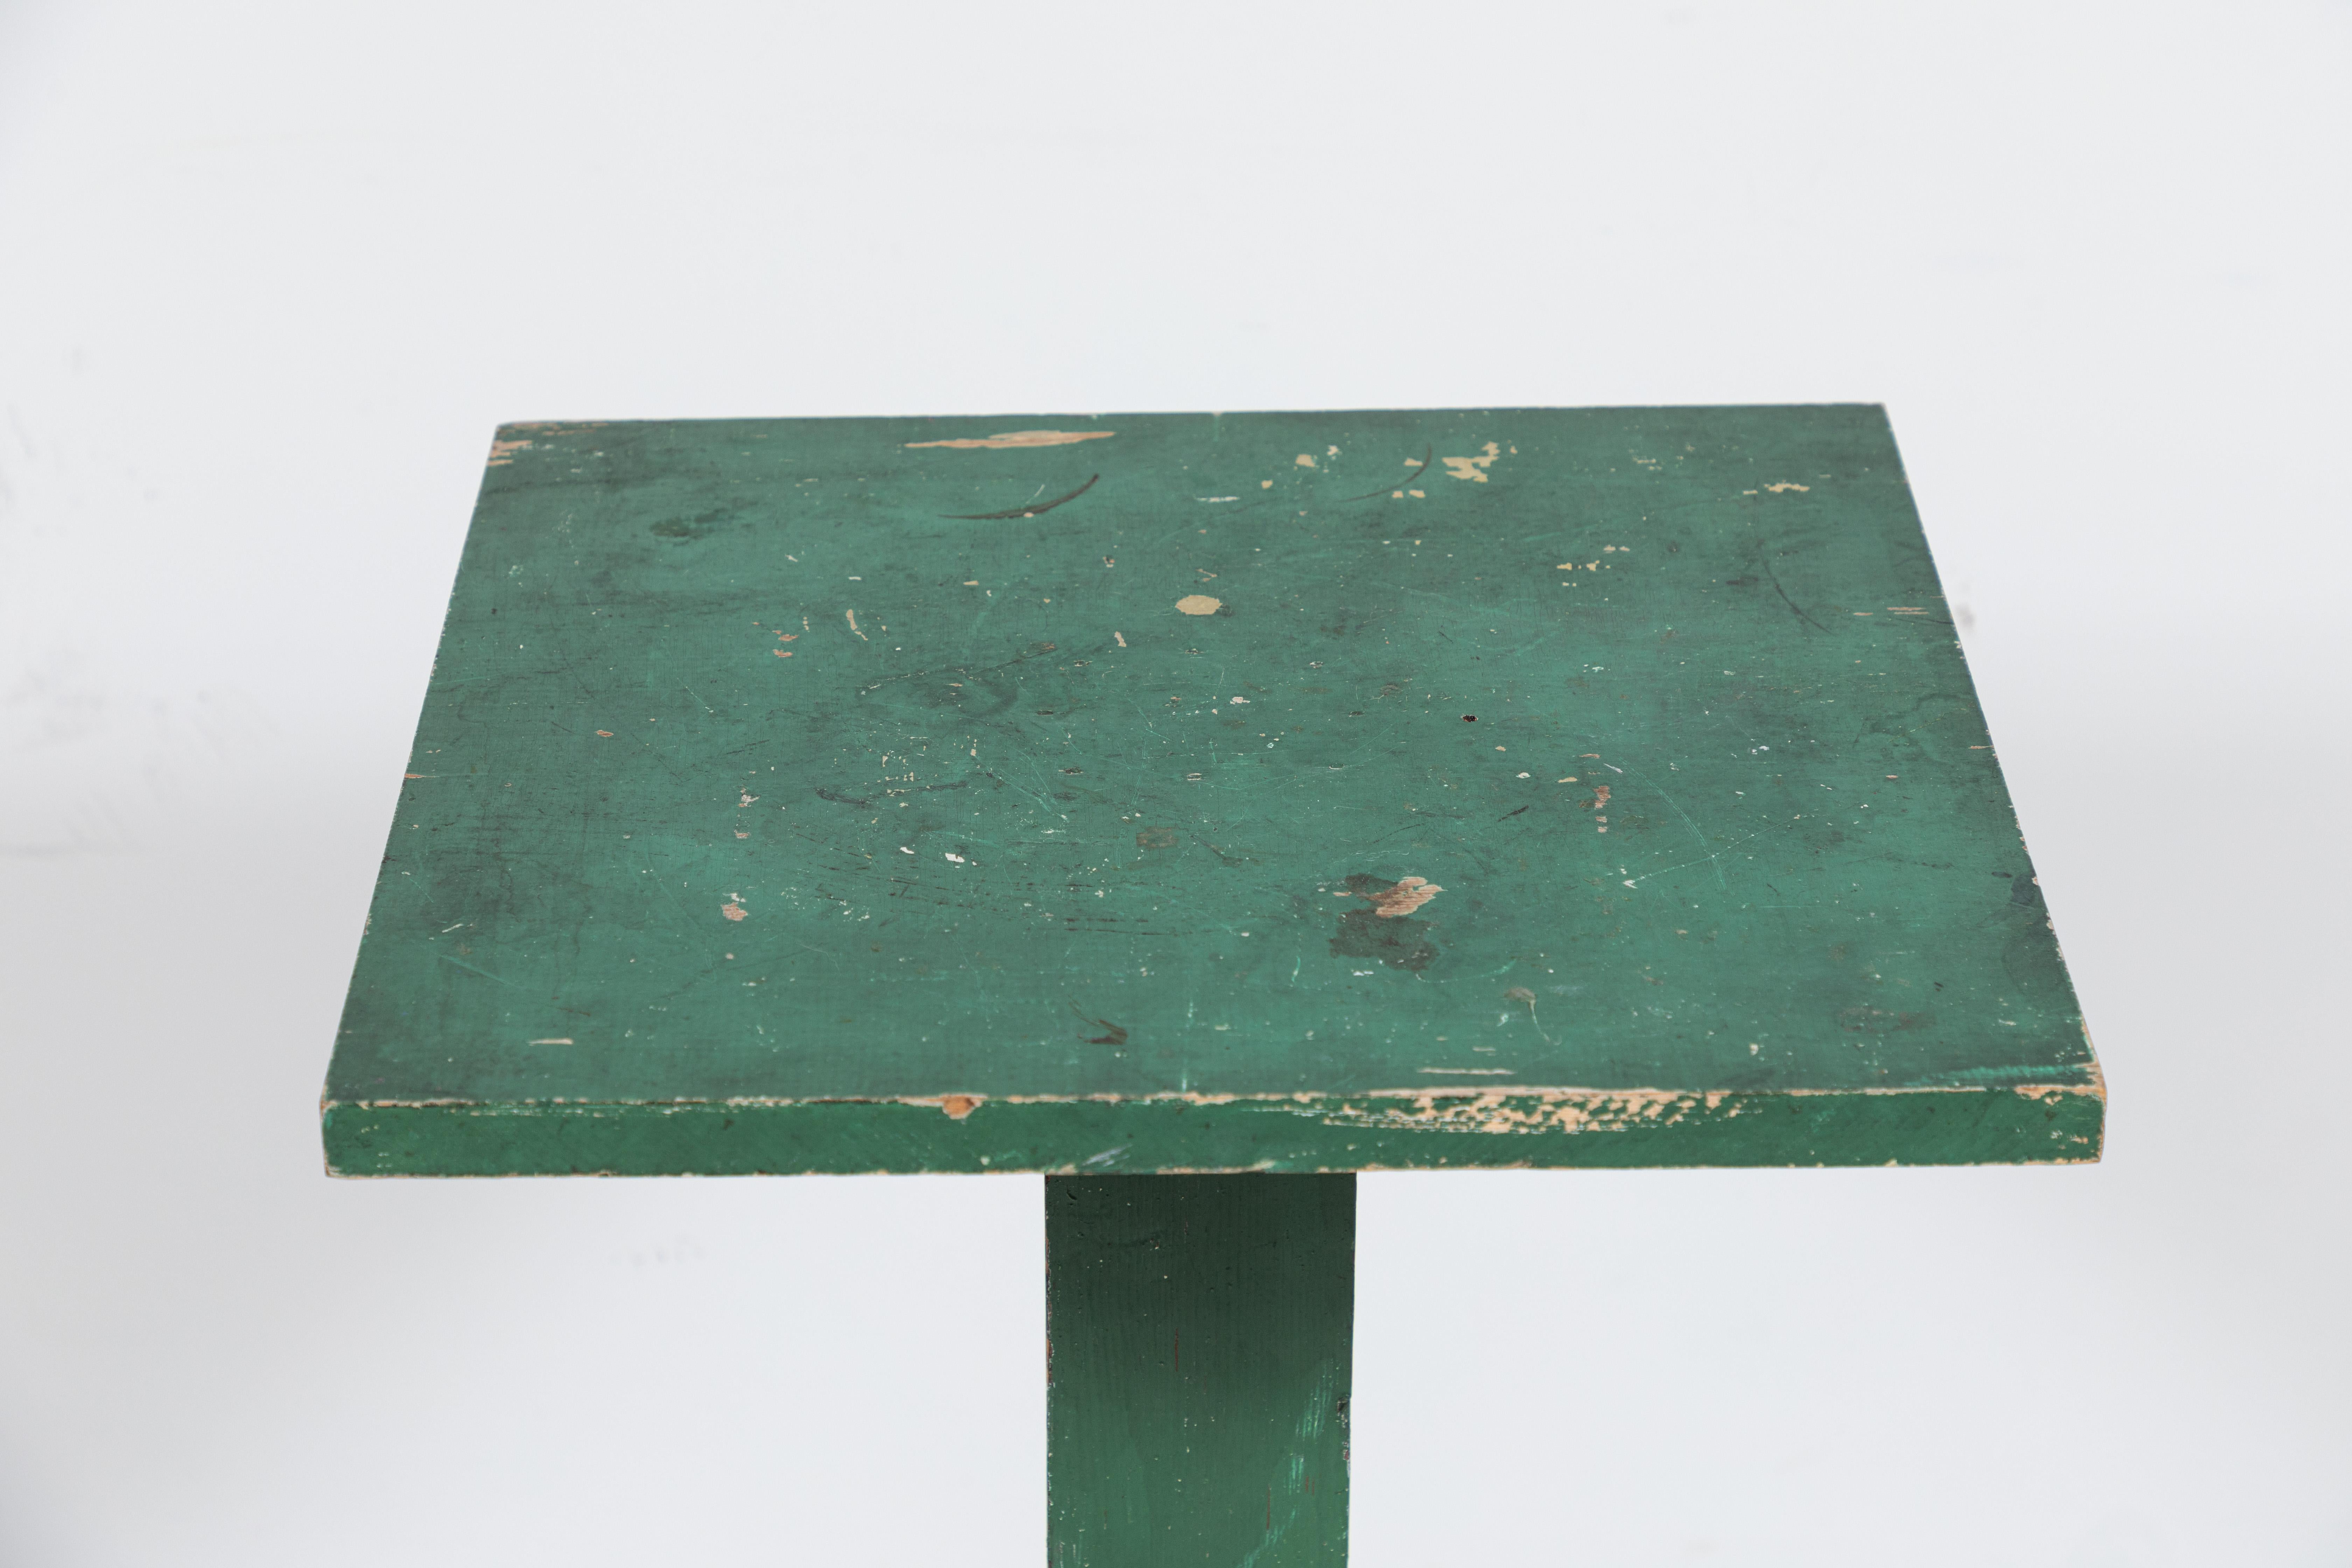 Early American green painted pedestal table. Simple construction, the table offers a bit of history and patina.